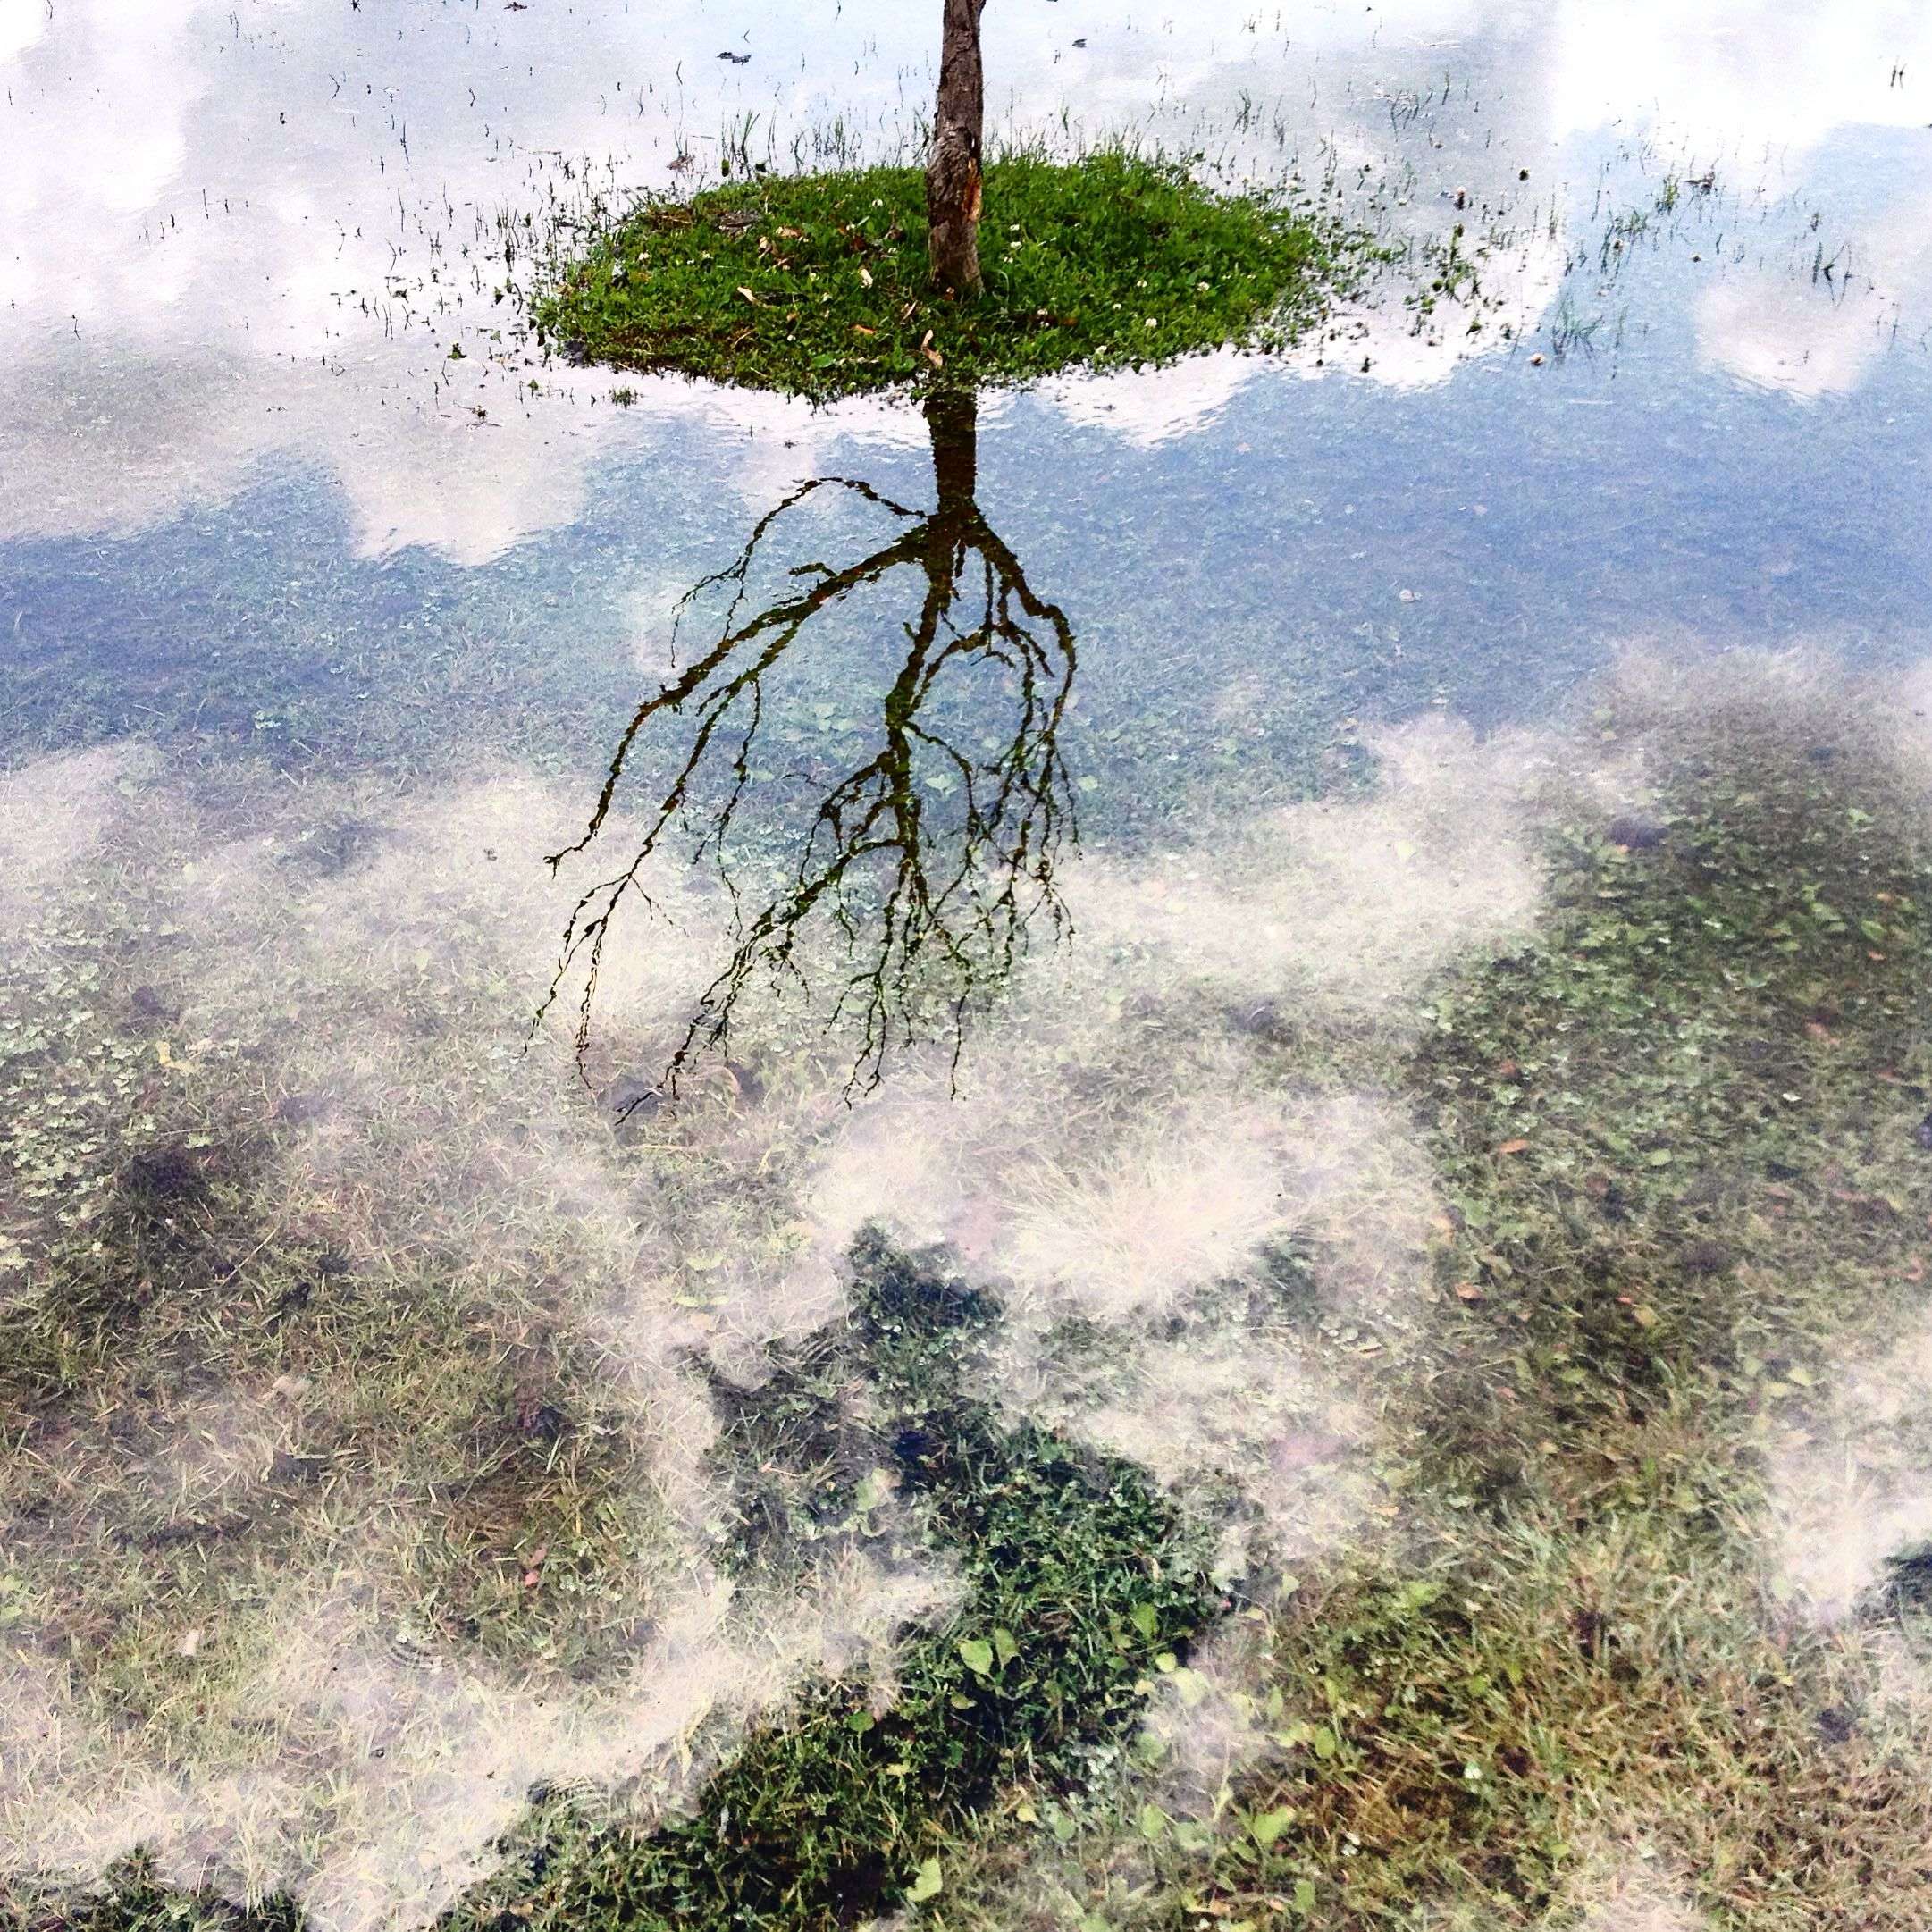 A tree is reflected in a puddle at Wahconah Park in Pittsfield, Mass. (AP Photo/The Berkshire Eagle, Ben Garver)